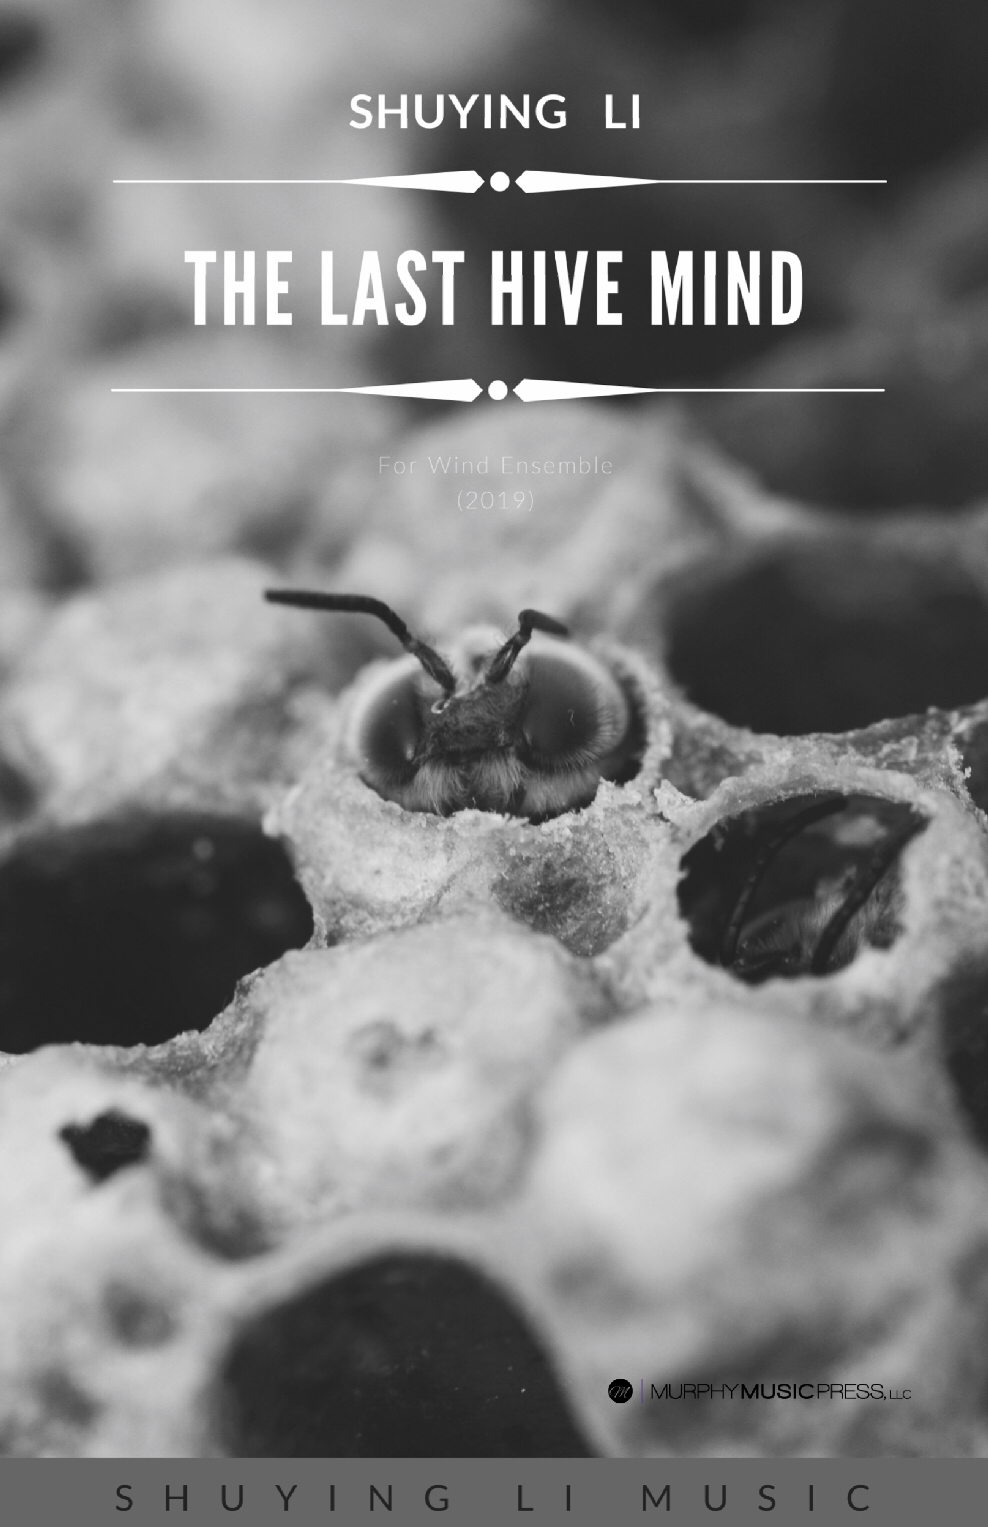 The Last Hivemind by Shuying Li